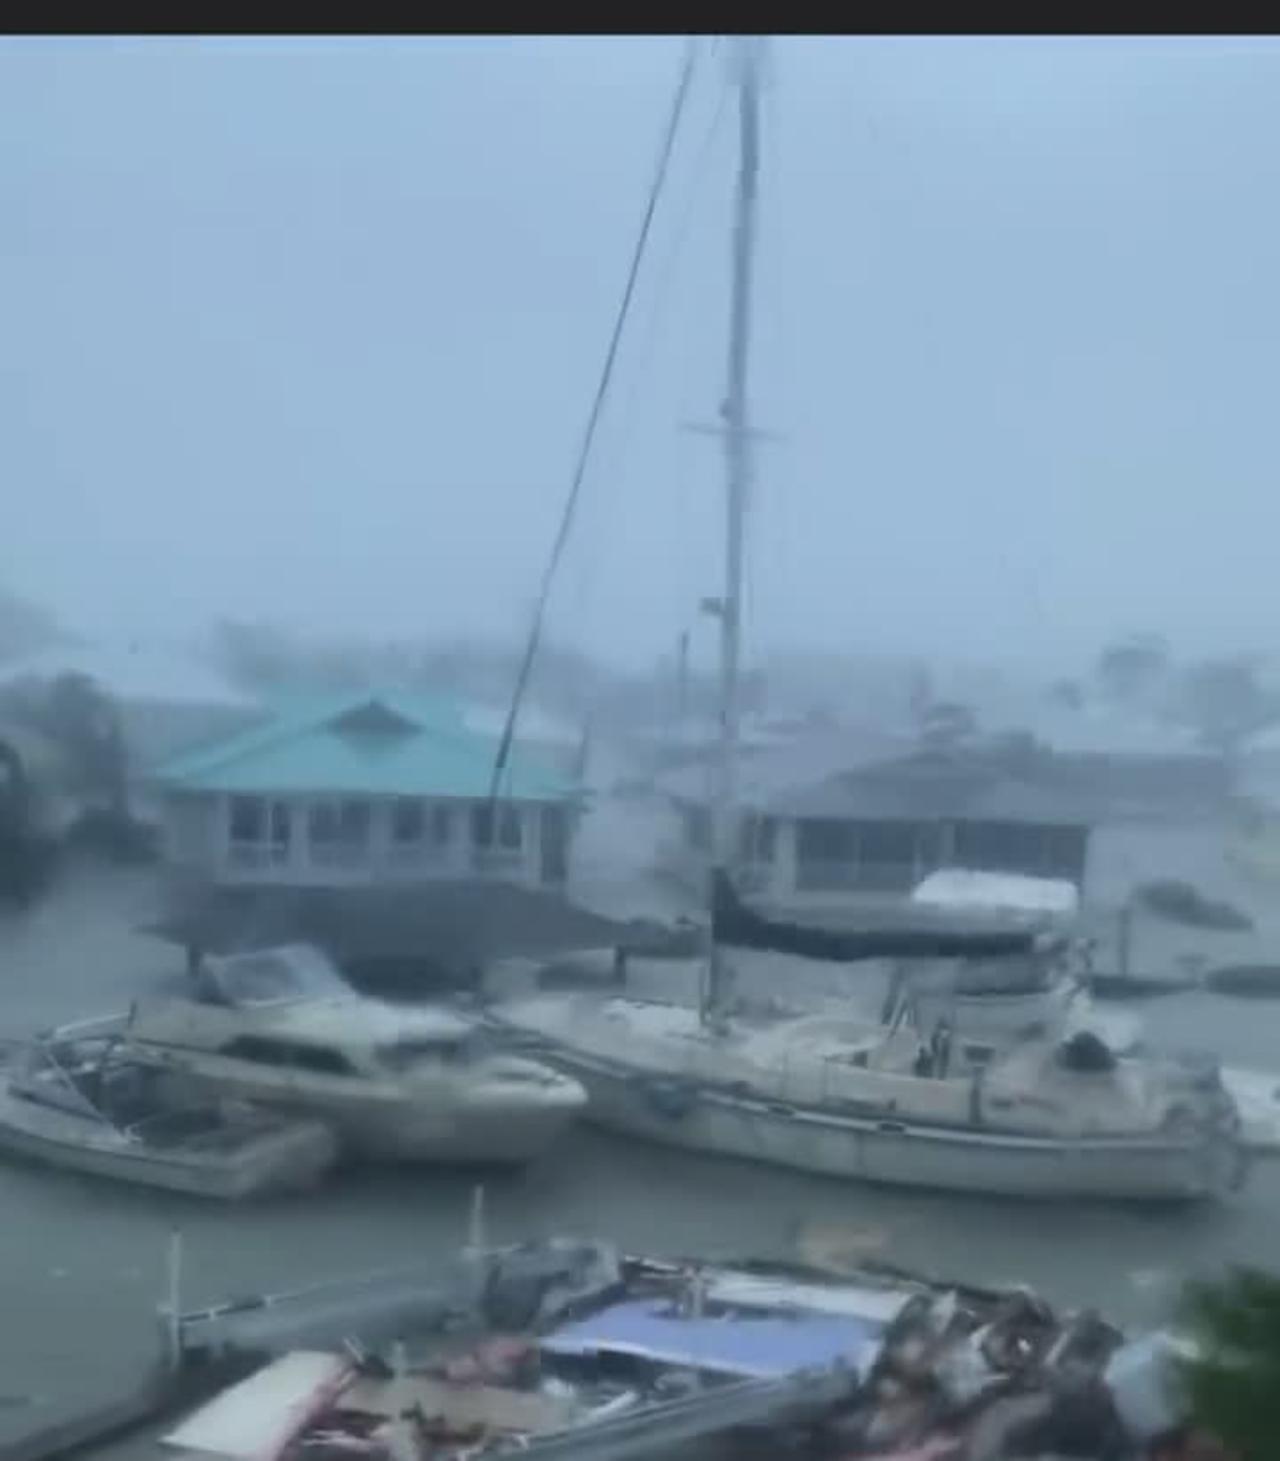 Hurricane Ian doing unreal damage to Florida, yachts floating by.